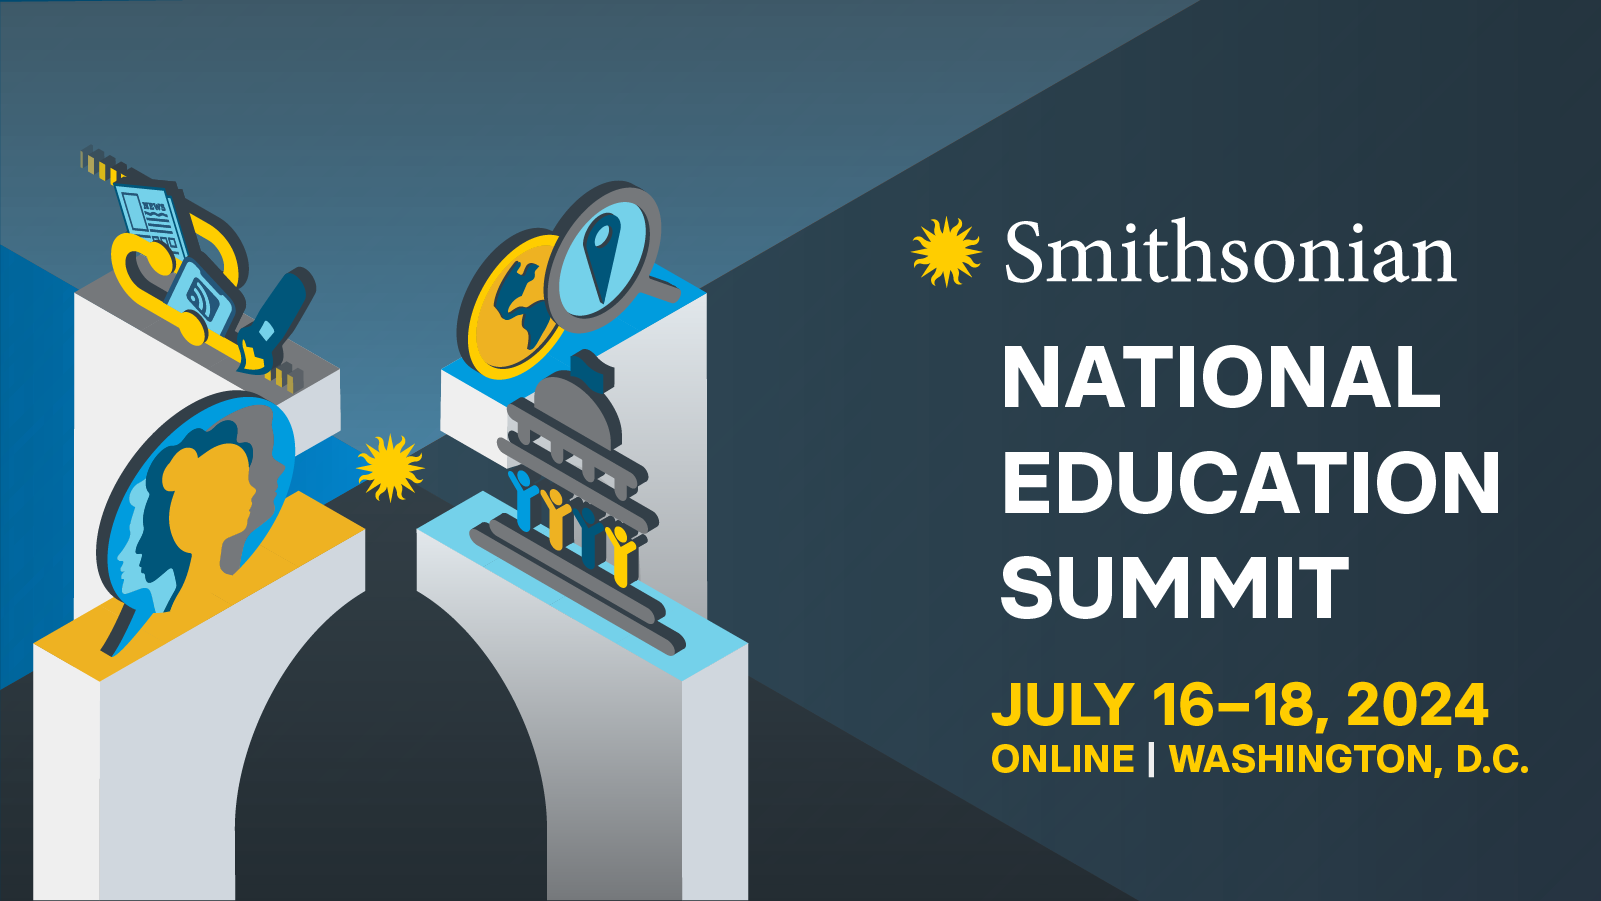 Graphic: 4 grey, blue, and yellow icons representing the 4 session tracks are on columns. Text: Smithsonian National Education Summit